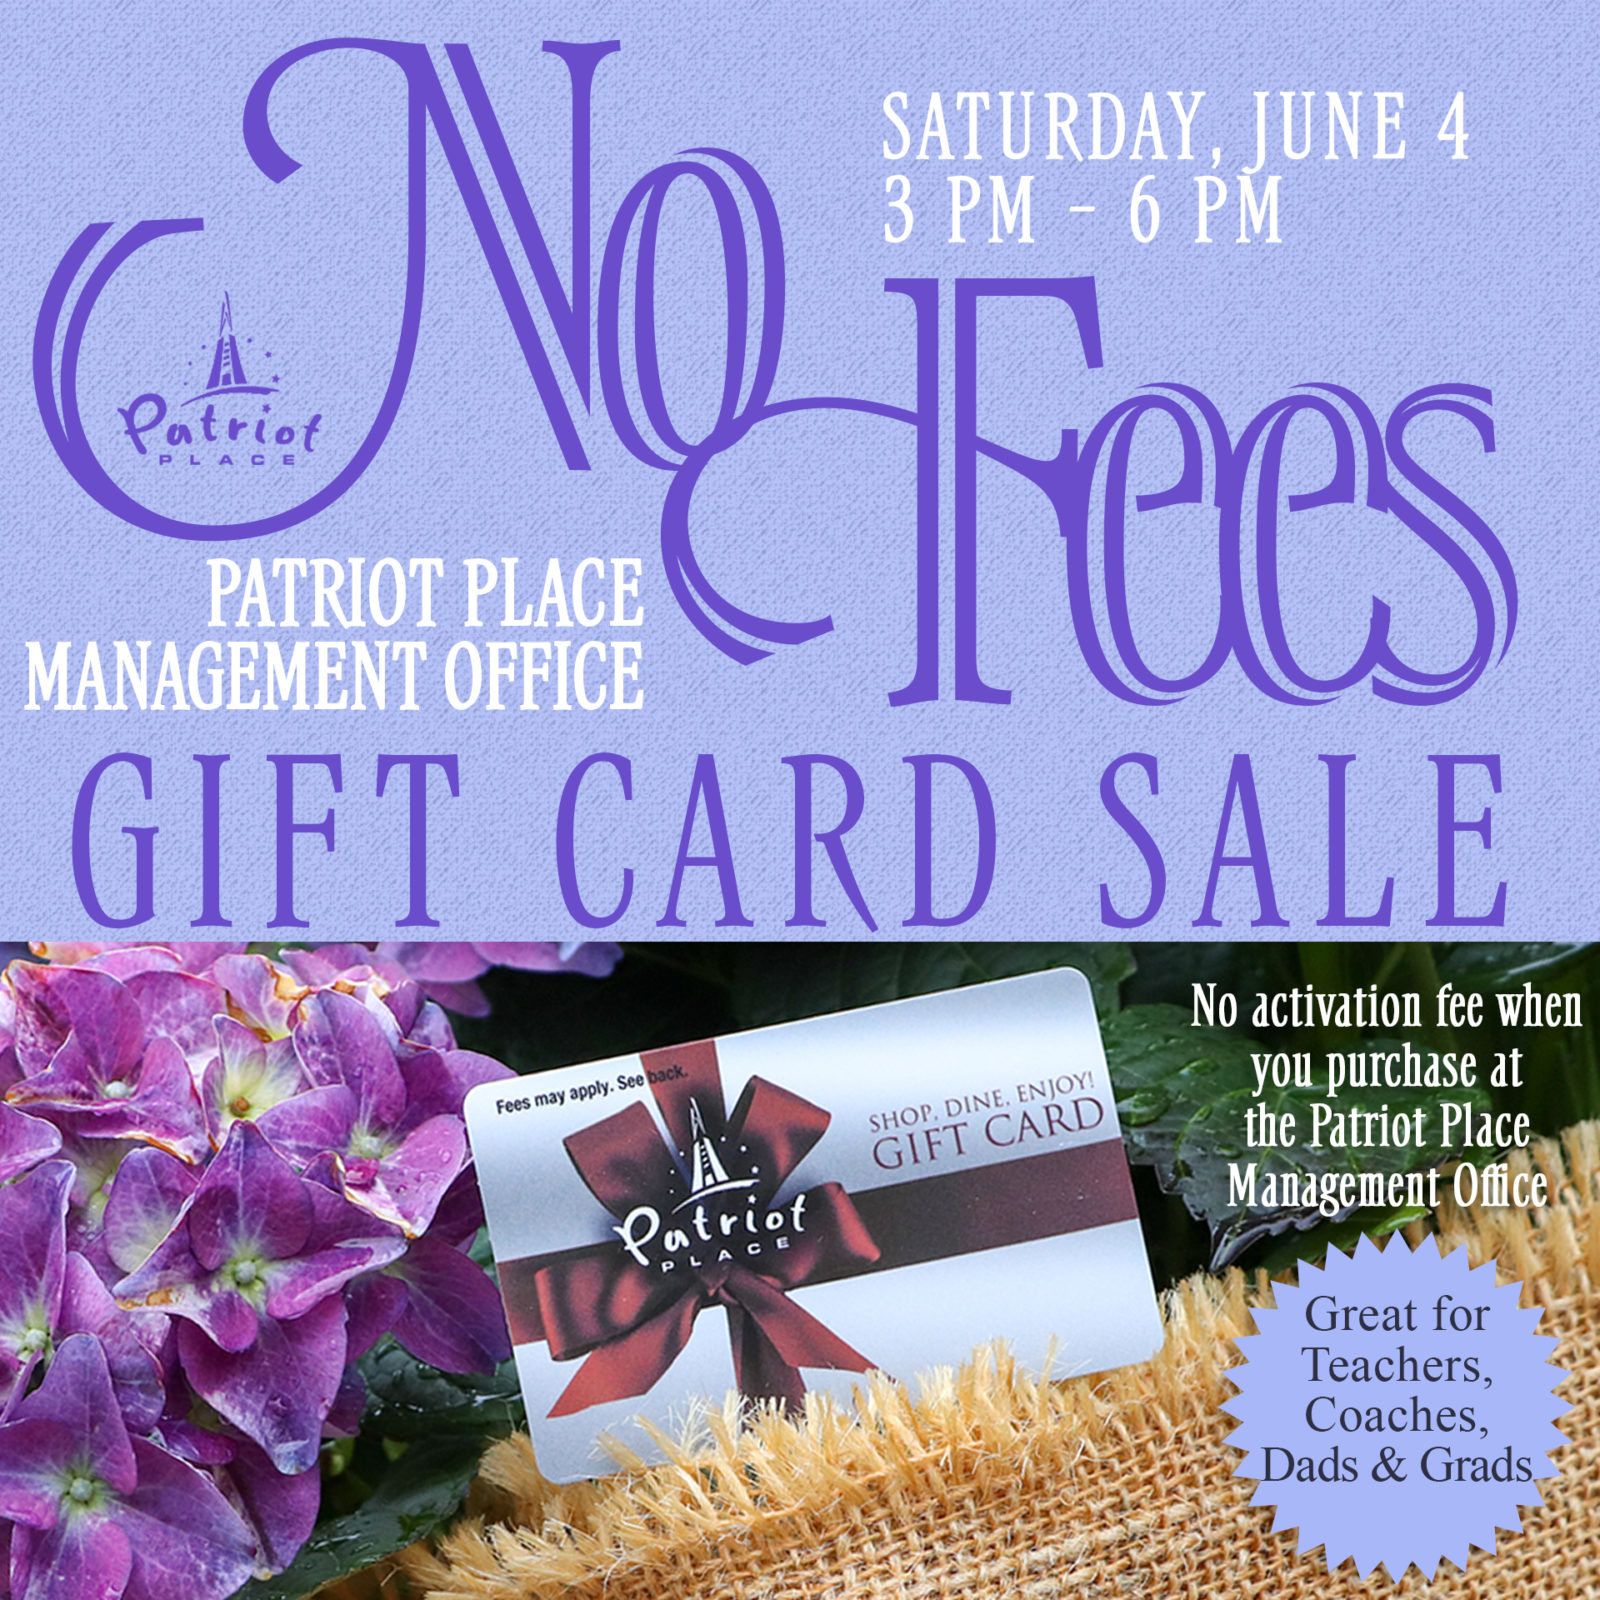 No Fees Gift Card Sale Saturday, June 4 3pm - 6pm Patriot Place Management Office